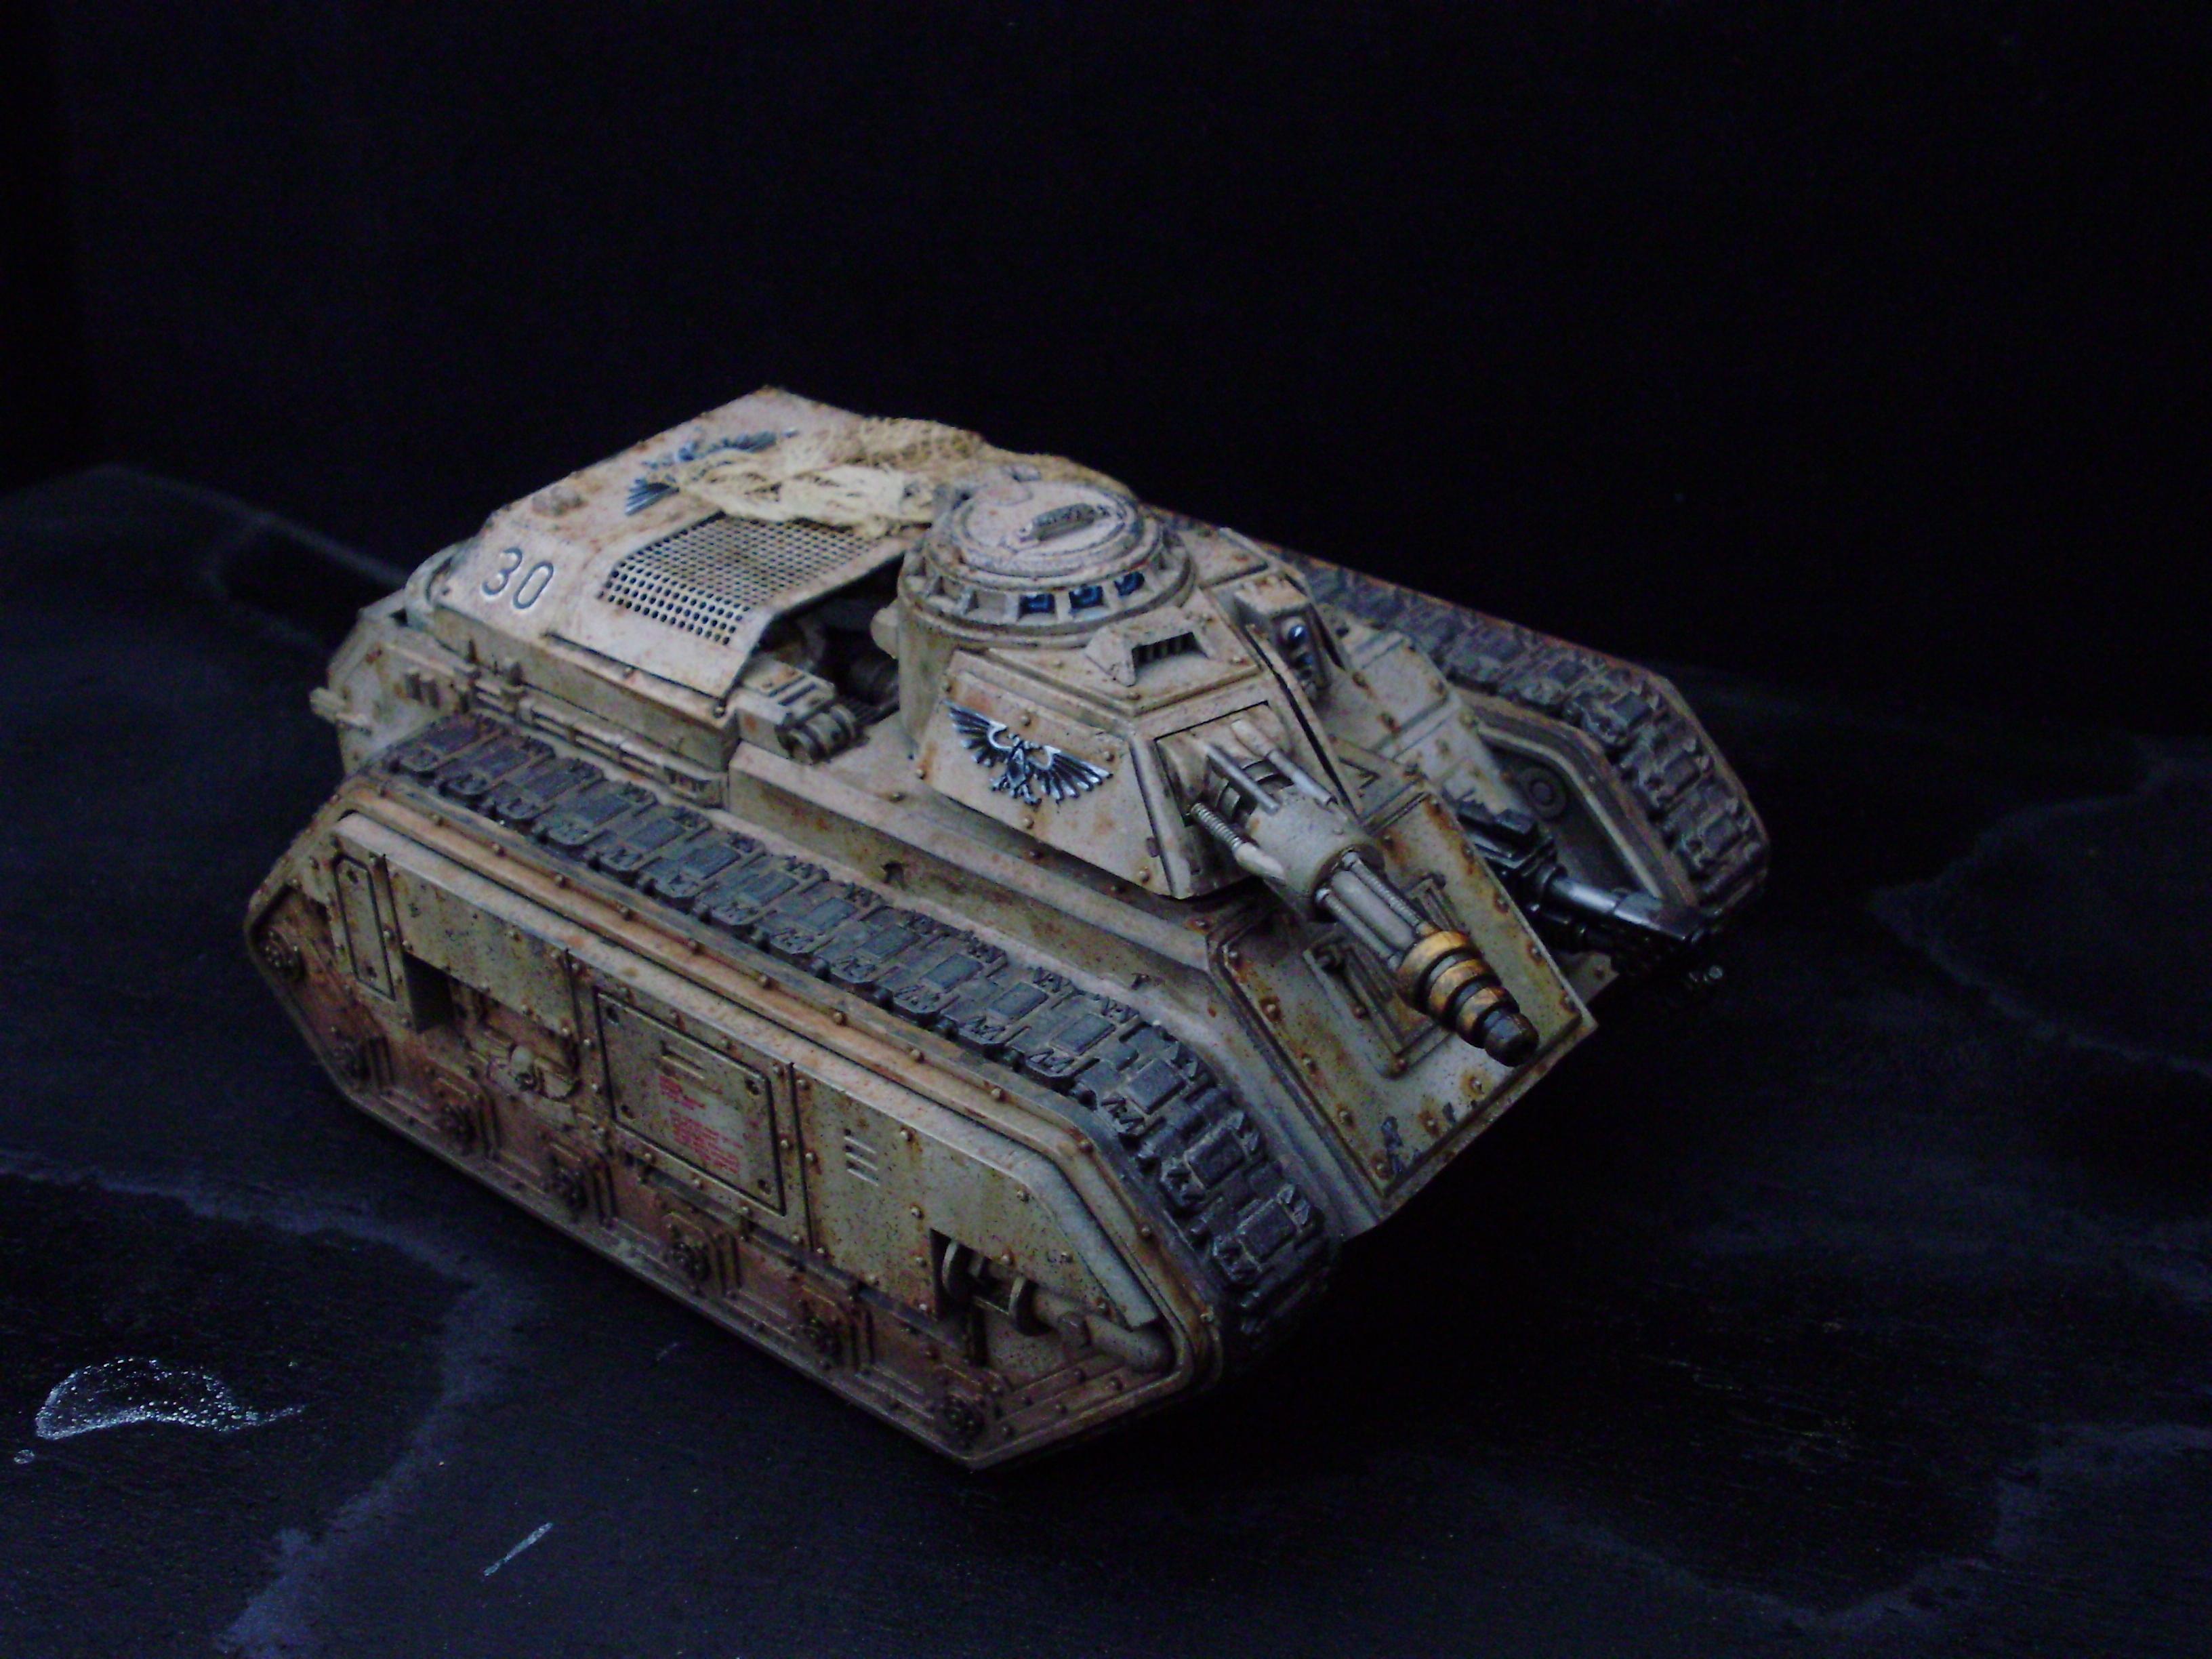 Banewolf, Imperial Guard, Tank, Weathered